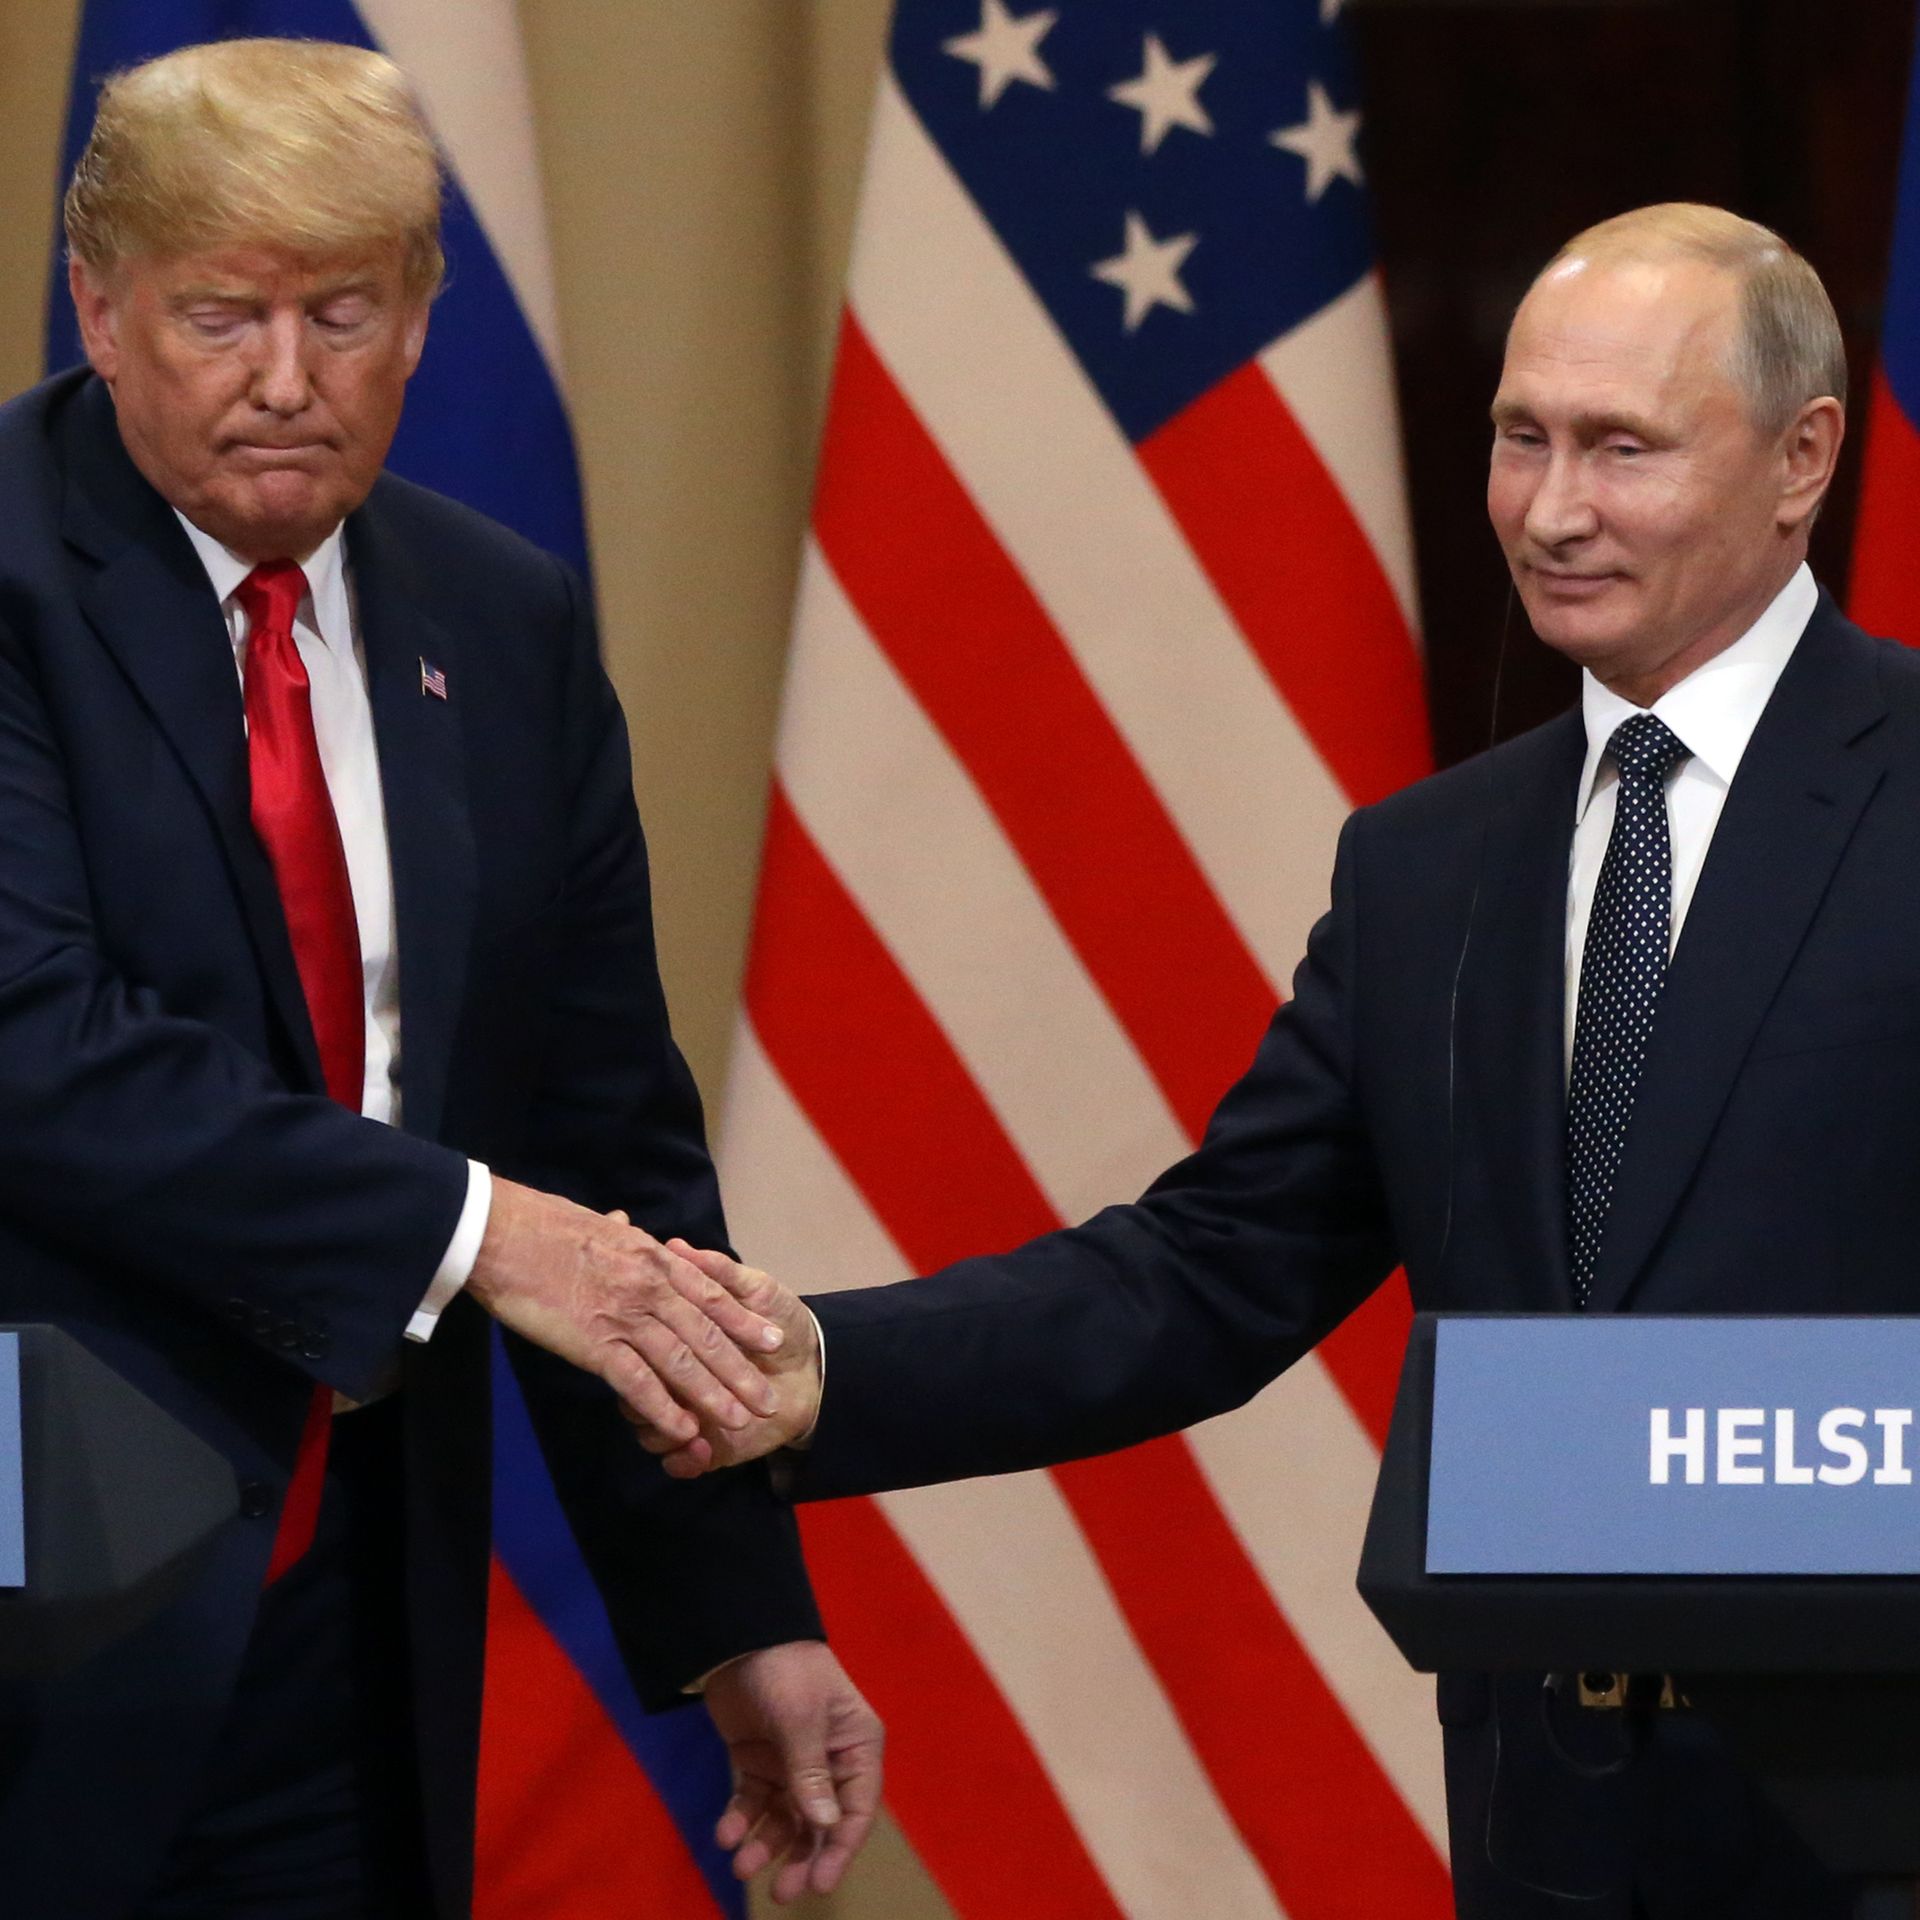 Trump and Putin shake hands while standing at podiums for press conference